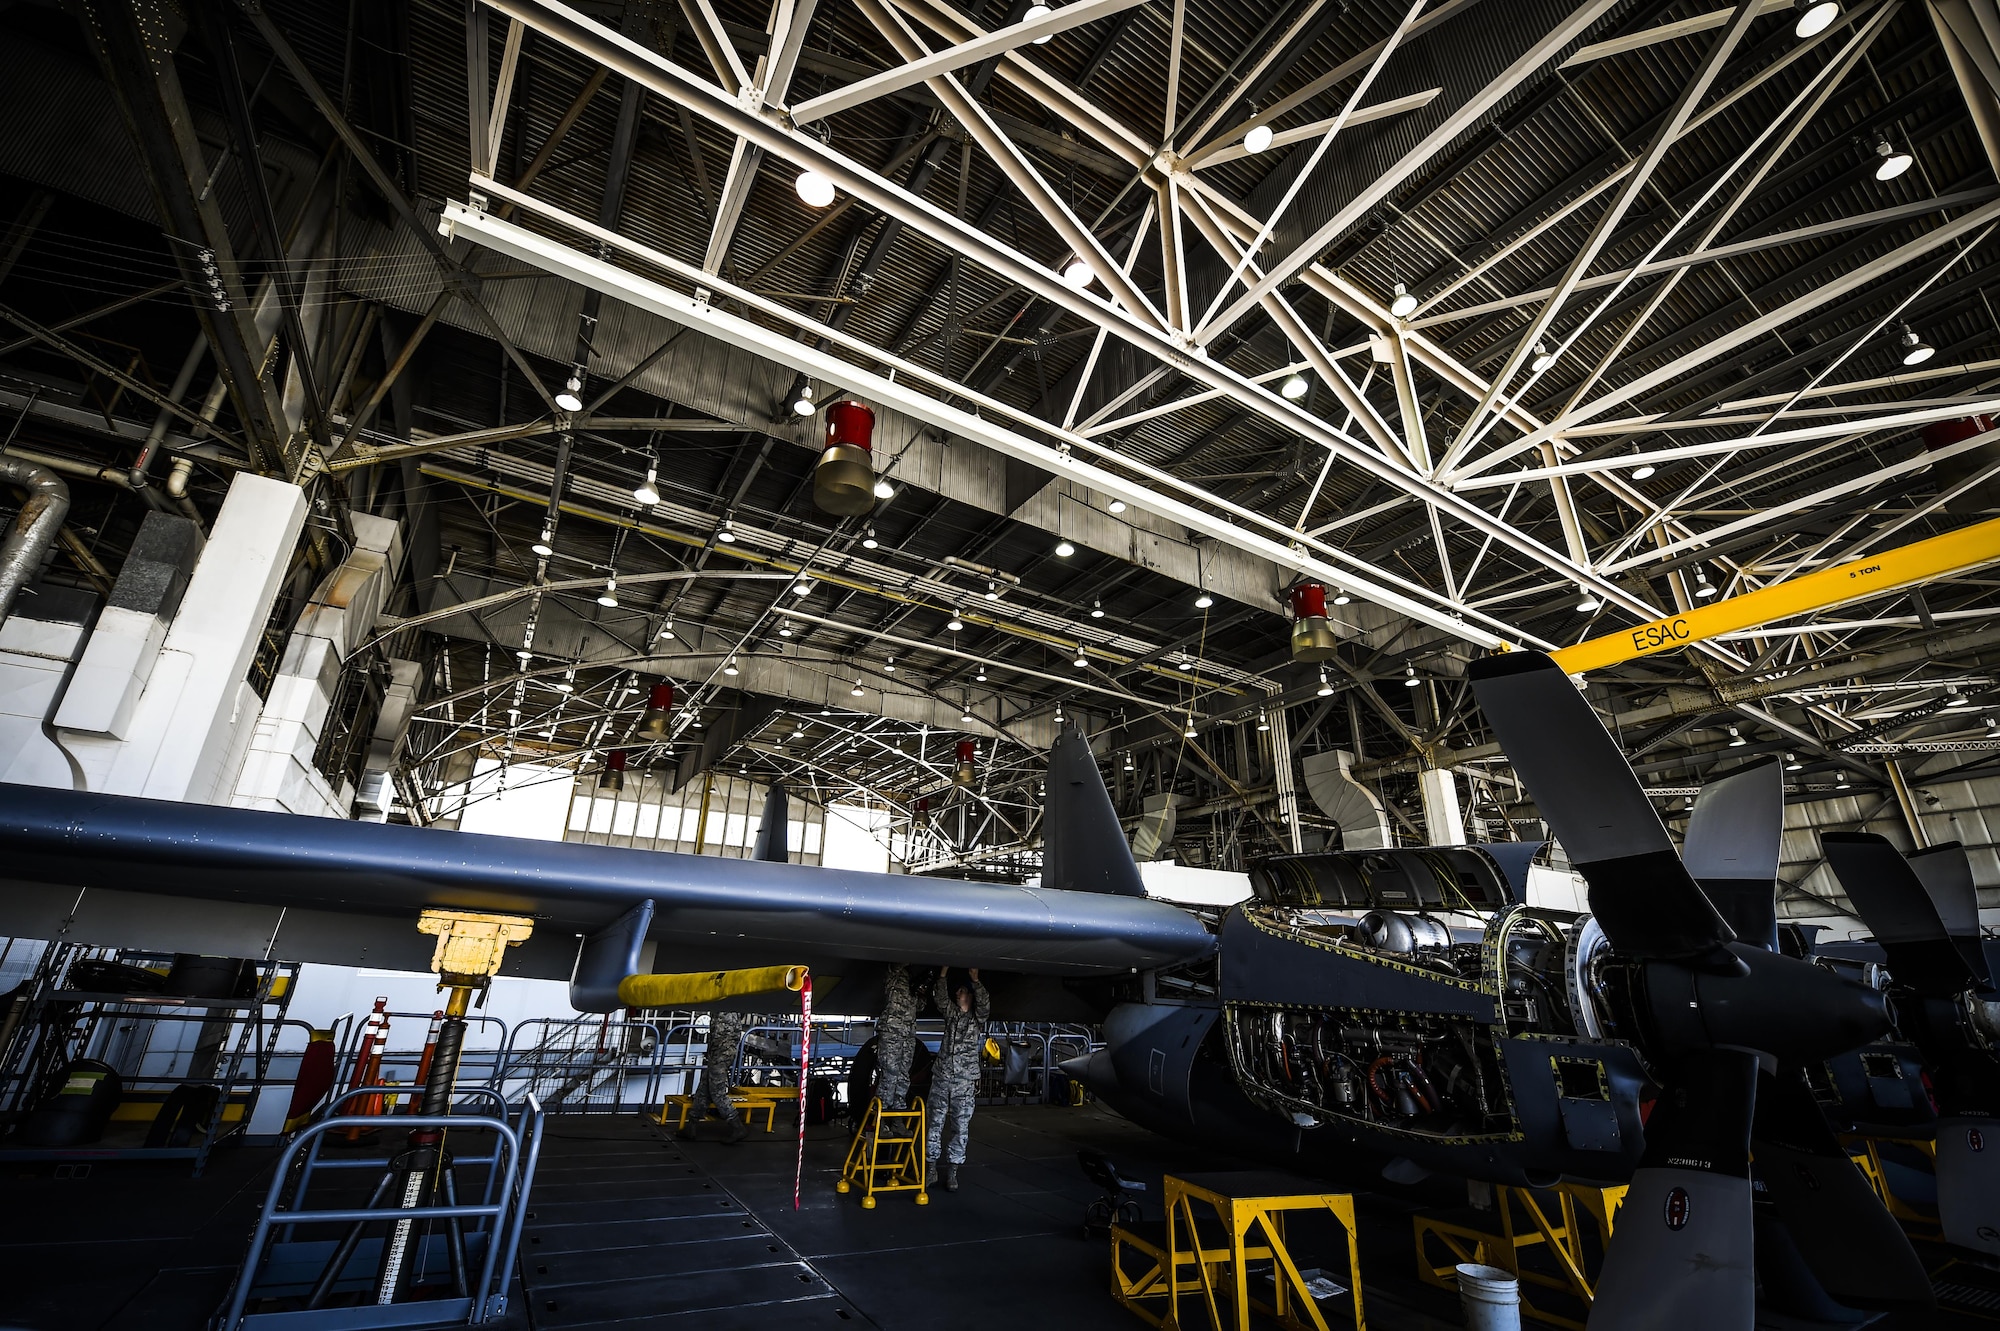 Airmen with the 1st Special Operations Equipment Maintenance Squadron non-destructive inspection flight examine a C-130 wing at the Eason Hangar on Hurlburt Field, Fla., July 20, 2015. Airmen inspect multiple locations of the aircraft, checking for flaws and cracks that could be dangerous if left undetected. (U.S. Air Force photo by Senior Airman Christopher Callaway)